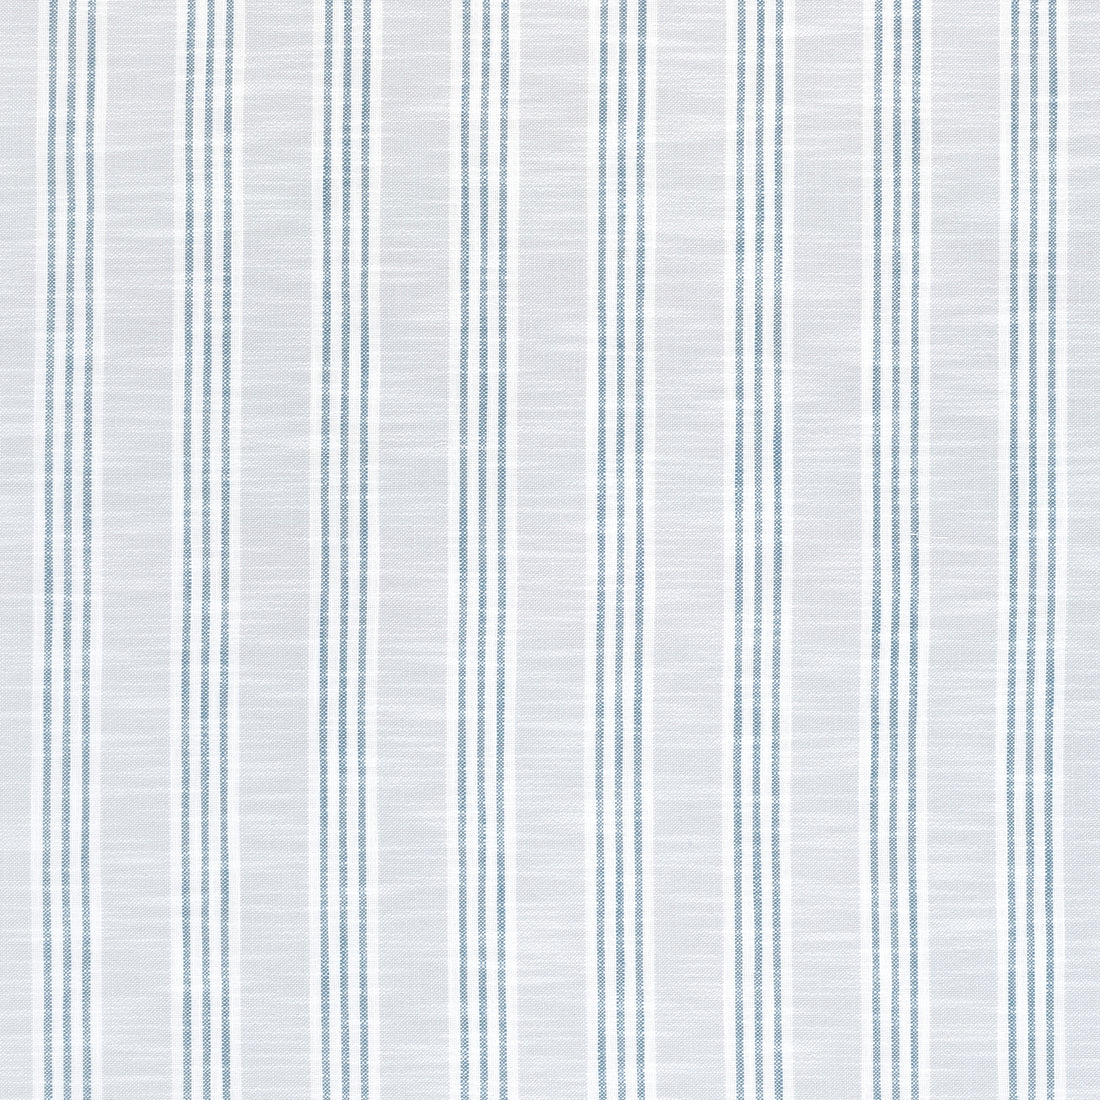 Southport Stripe fabric in sterling and cobalt color - pattern number W73484 - by Thibaut in the Landmark collection